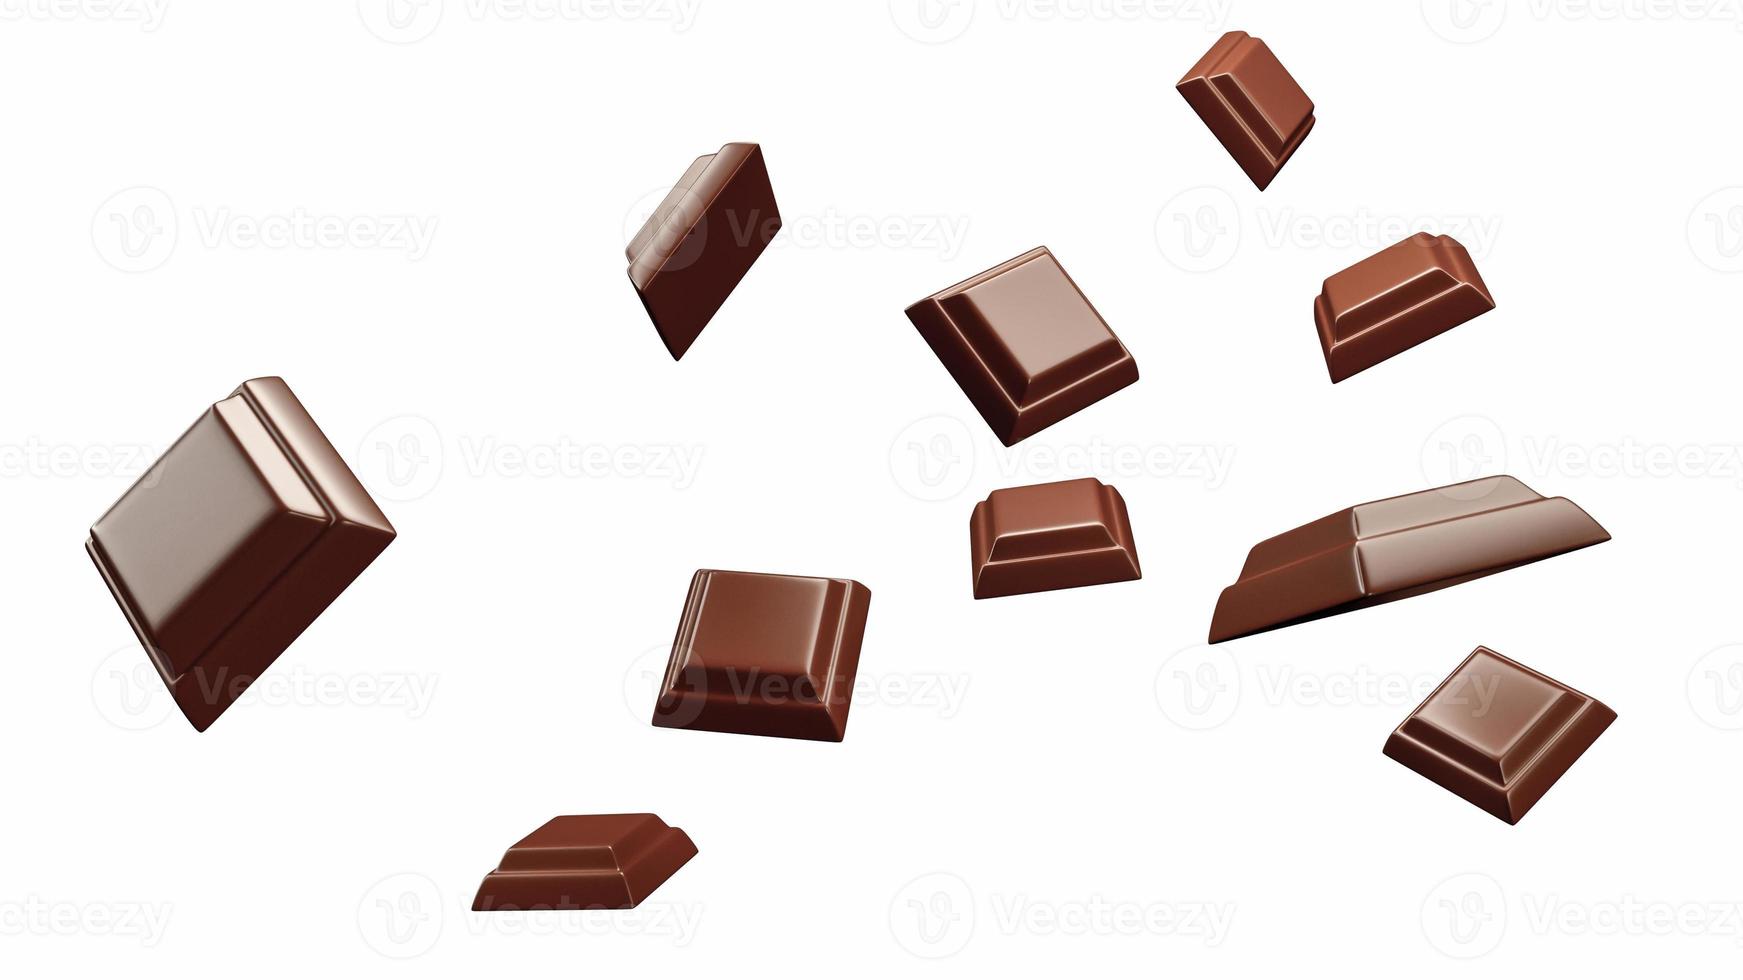 close up of chocolate pieces stack falling Many Chocolate cubes falling with one closer in the center. Isolated on white background. 3d rendering 3d illustration photo